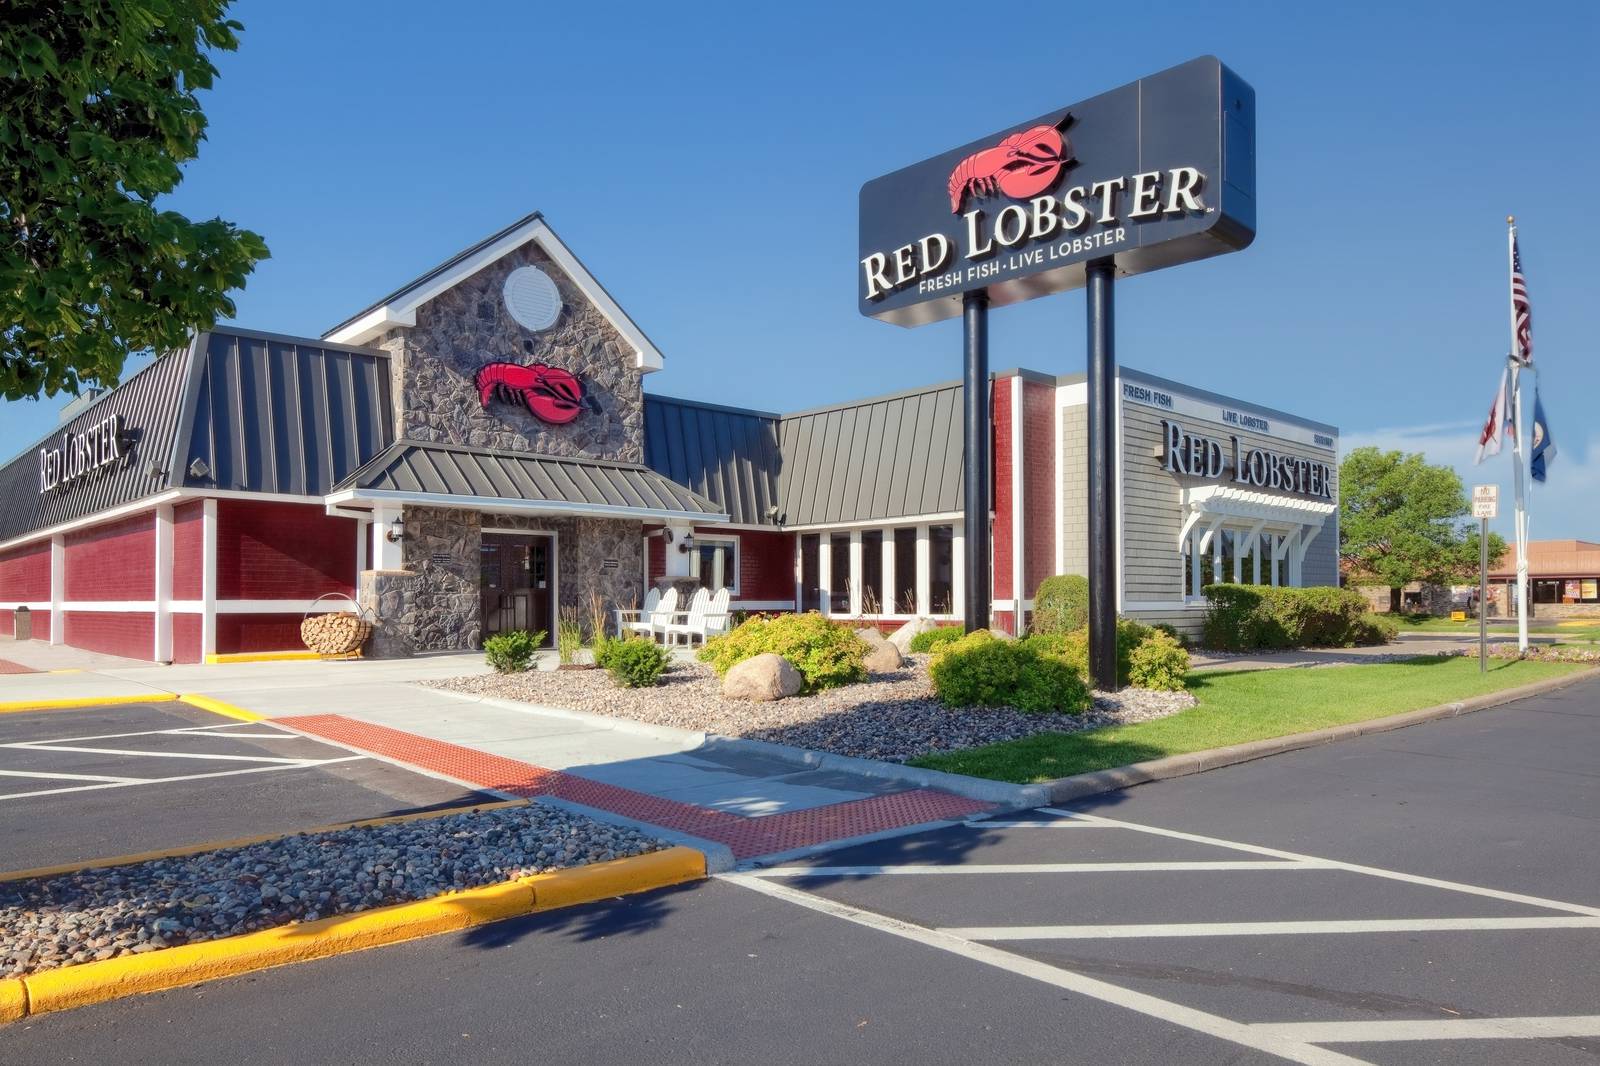 Looking for work? Red Lobster hiring today at 20 Orlando area locations